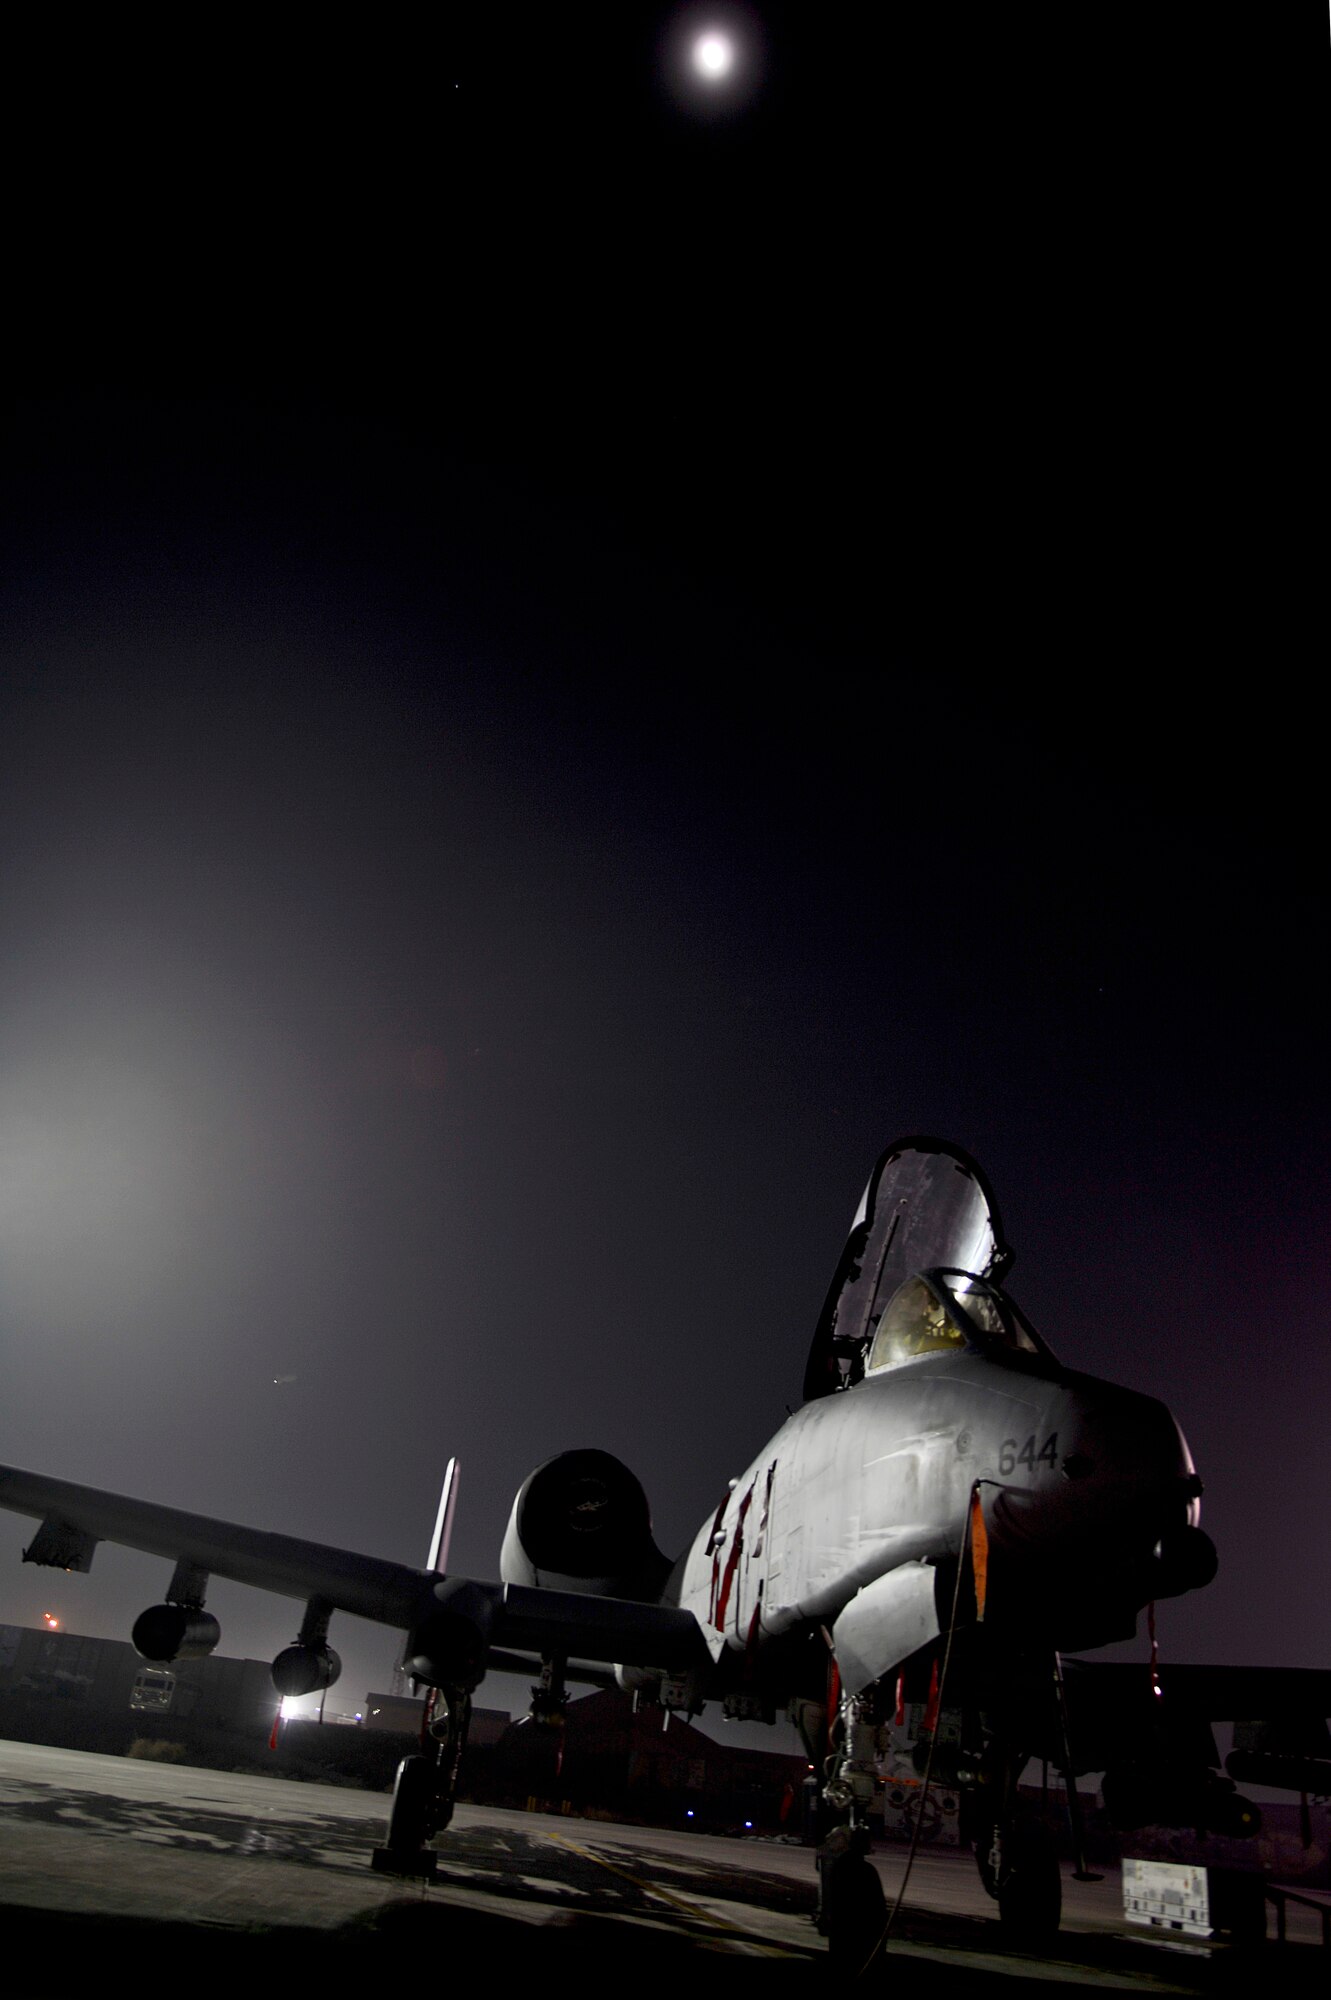 An A-10 Thunderbolt II awaits a weapons reload at Bagram Airfield, Afghanistan, Feb. 10, 2014. Airmen deployed from Moody Air Force Base, Ga., performed the weapons reload.  (U.S. Air Force photo by Senior Airman Kayla Newman/Released)